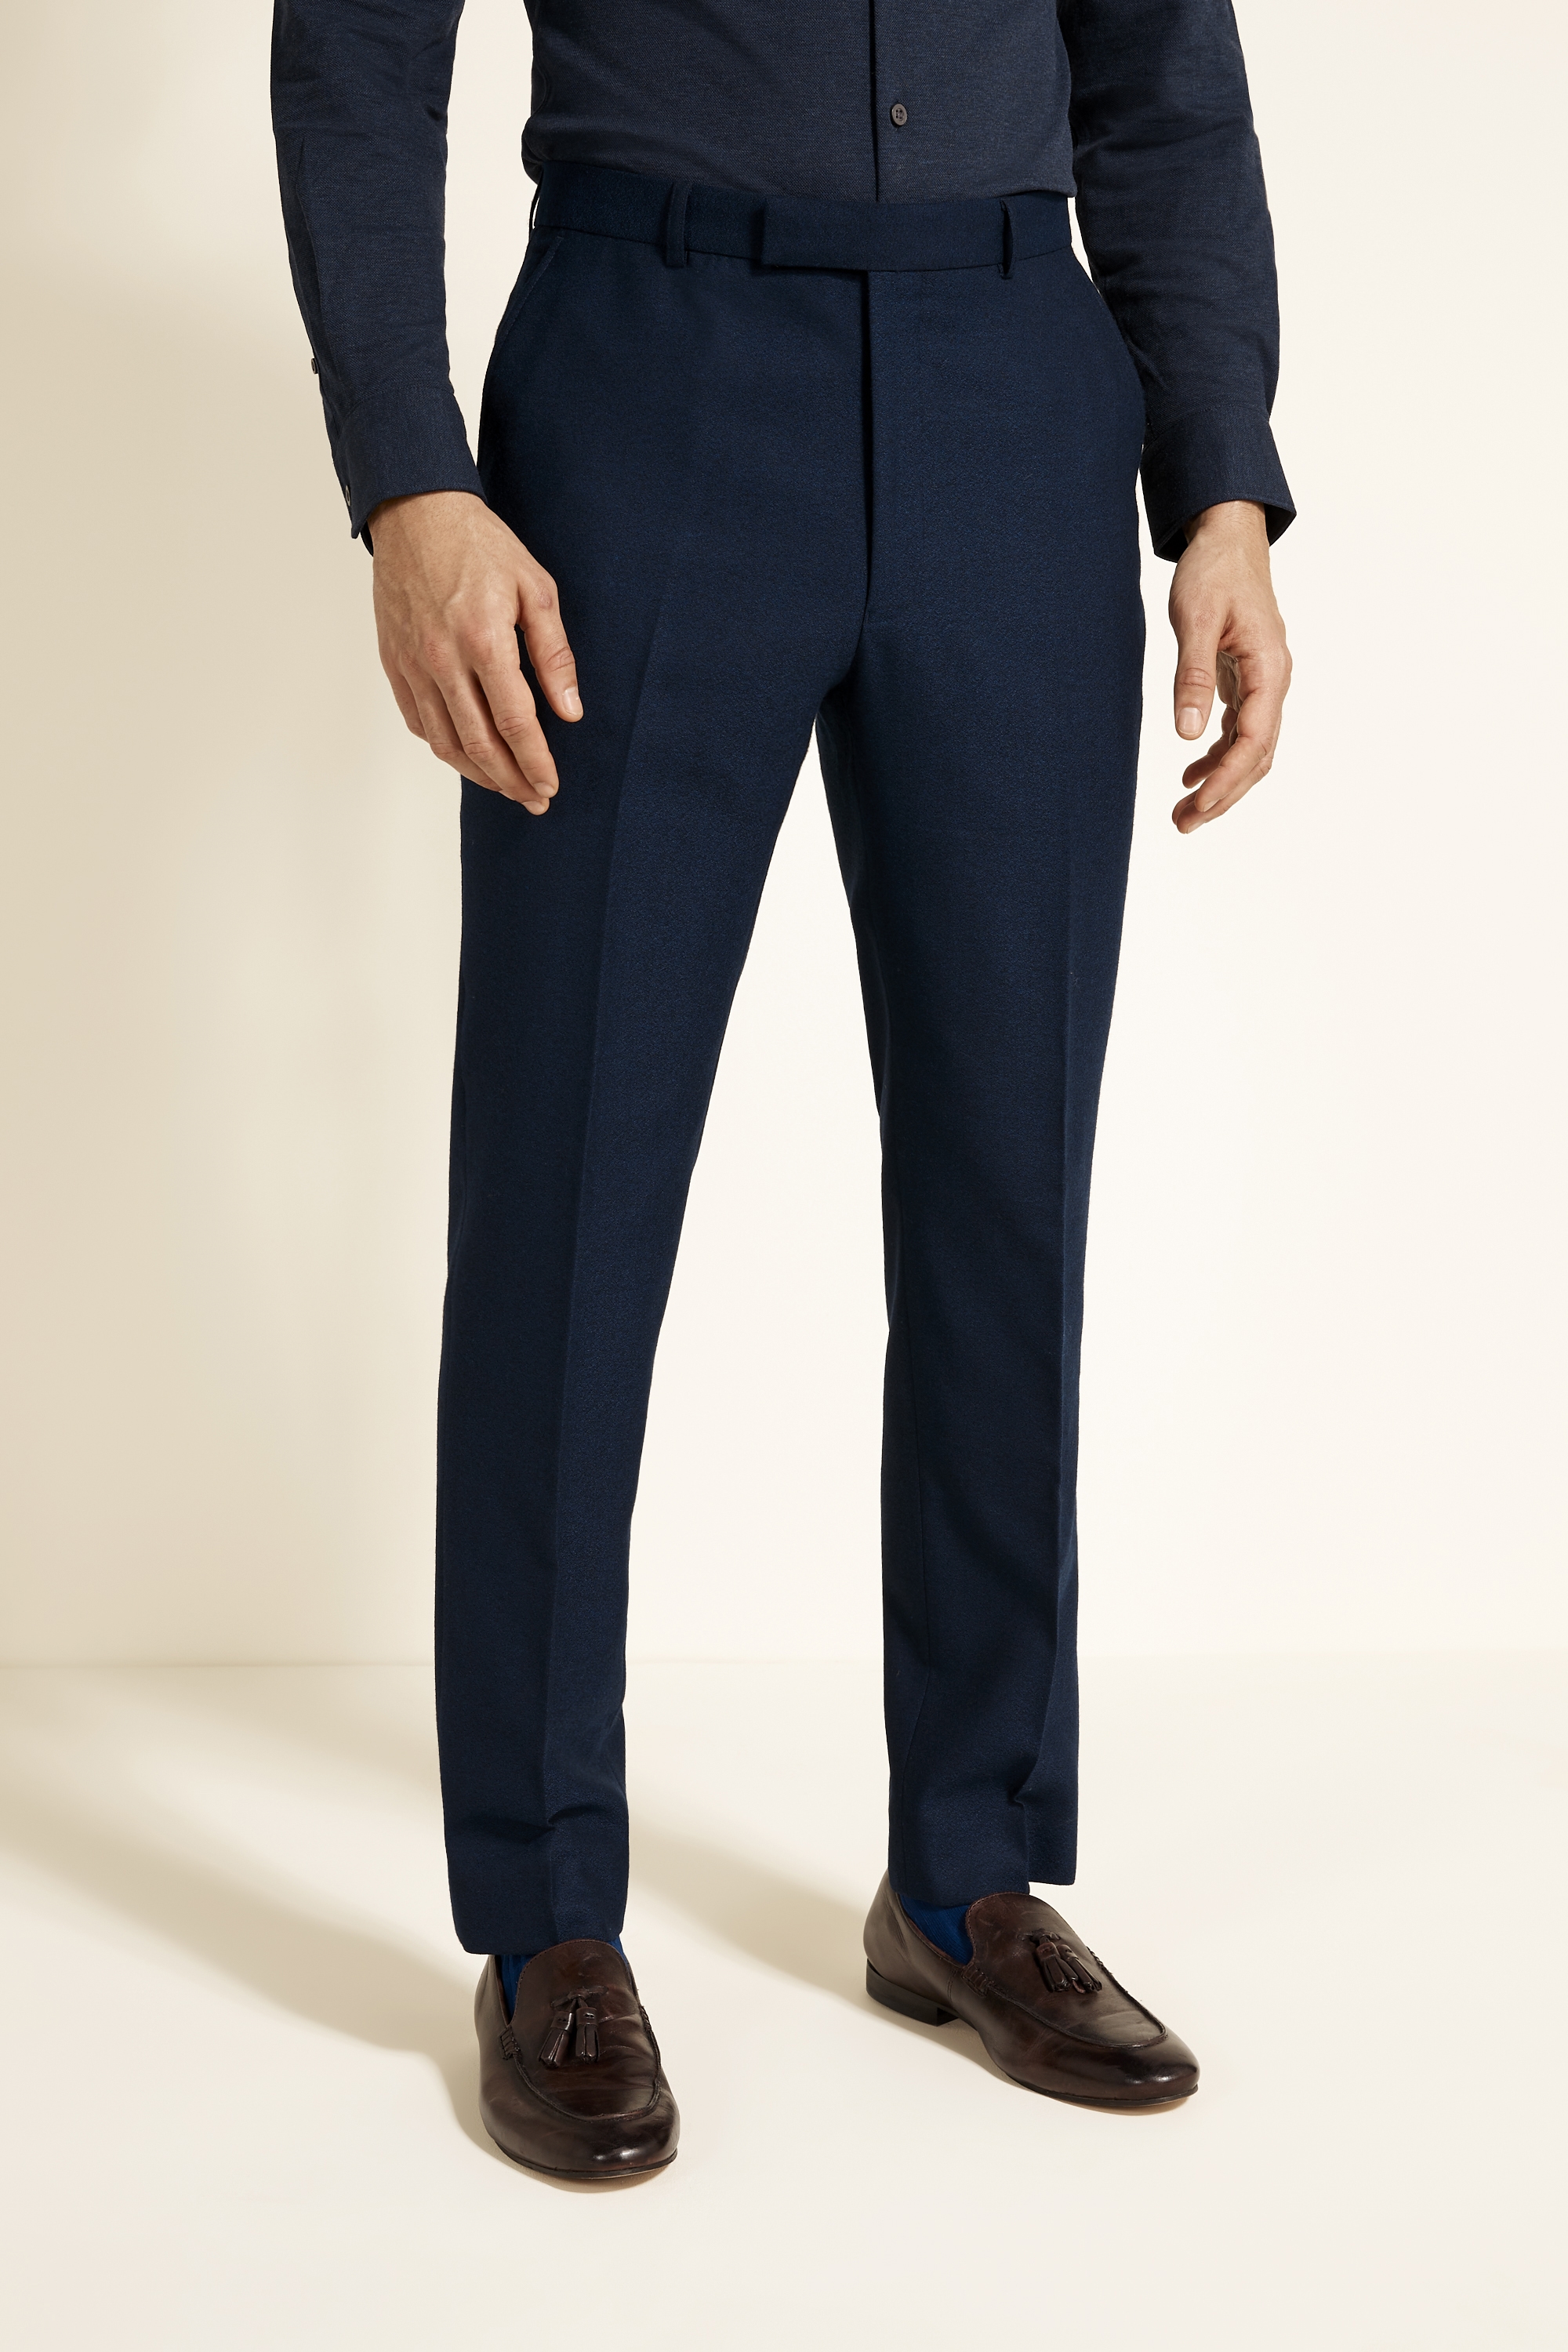 French Connection Slim Fit Ink Flannel Trousers